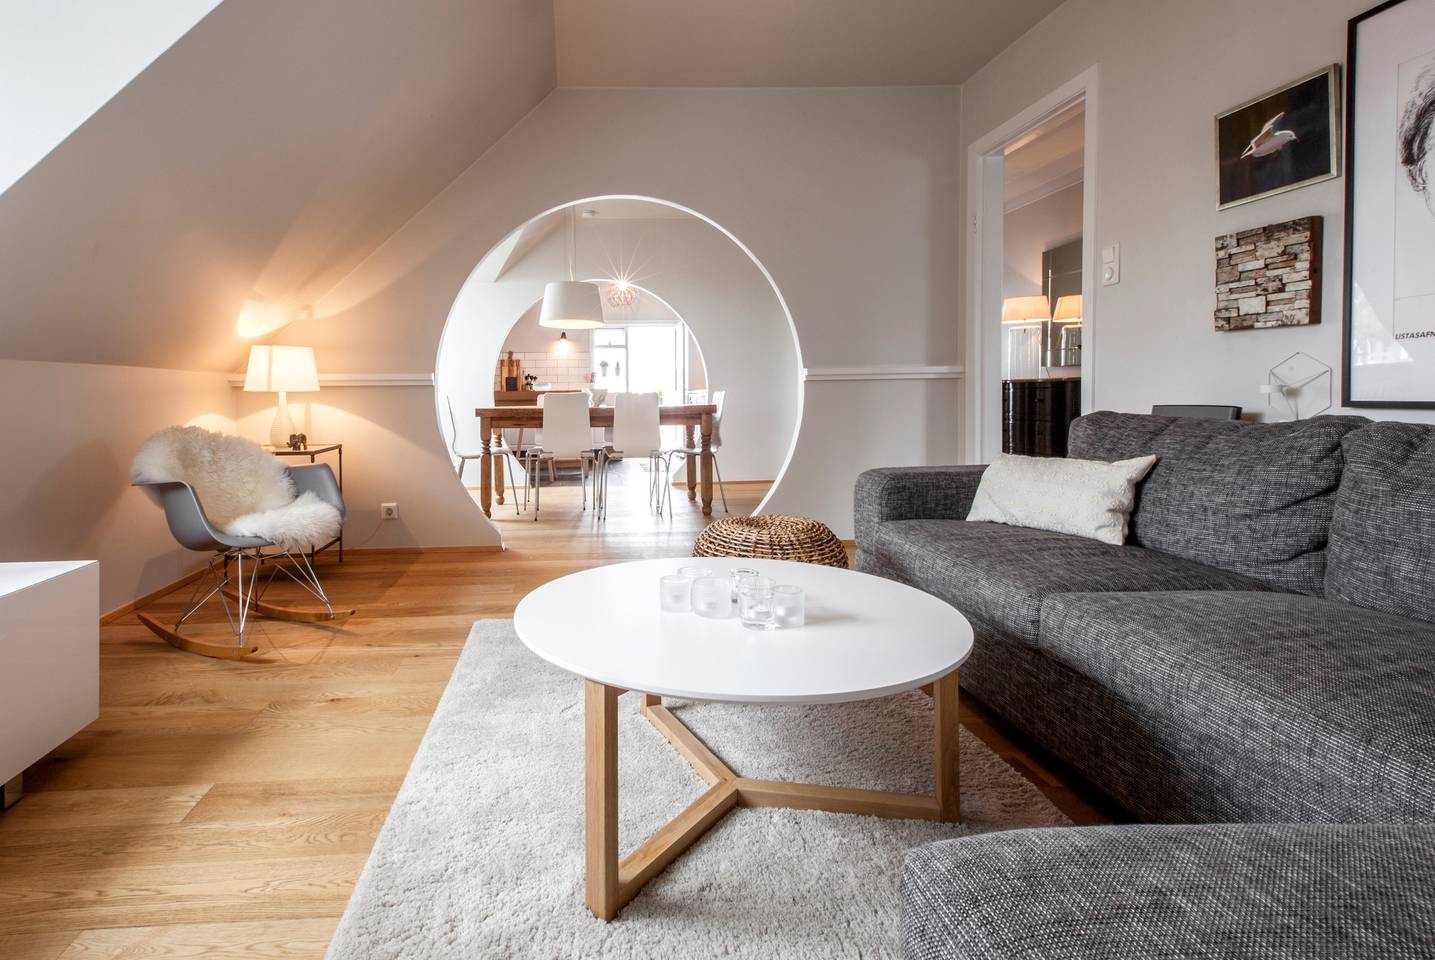 <p><strong>Bed & bath:</strong> 1 bedroom,  1 bathroom<br> <strong>Top amenities:</strong> Free parking, private balcony</p> <p>This third-floor apartment, about 20 minutes outside of the city center on foot, is Instagram bait. The home itself, with its circular doorways, bright white walls, and balcony overlooking the city are perfect for photo opportunities. But the one-bedroom home is cozy, too, for when you want to forget the likes and comments and just be in Reykjavík.</p> $170, Airbnb (starting price). <a href="https://www.airbnb.com/rooms/7346803">Get it now!</a><p>Sign up to receive the latest news, expert tips, and inspiration on all things travel</p><a href="https://www.cntraveler.com/newsletter/the-daily?sourceCode=msnsend">Inspire Me</a>